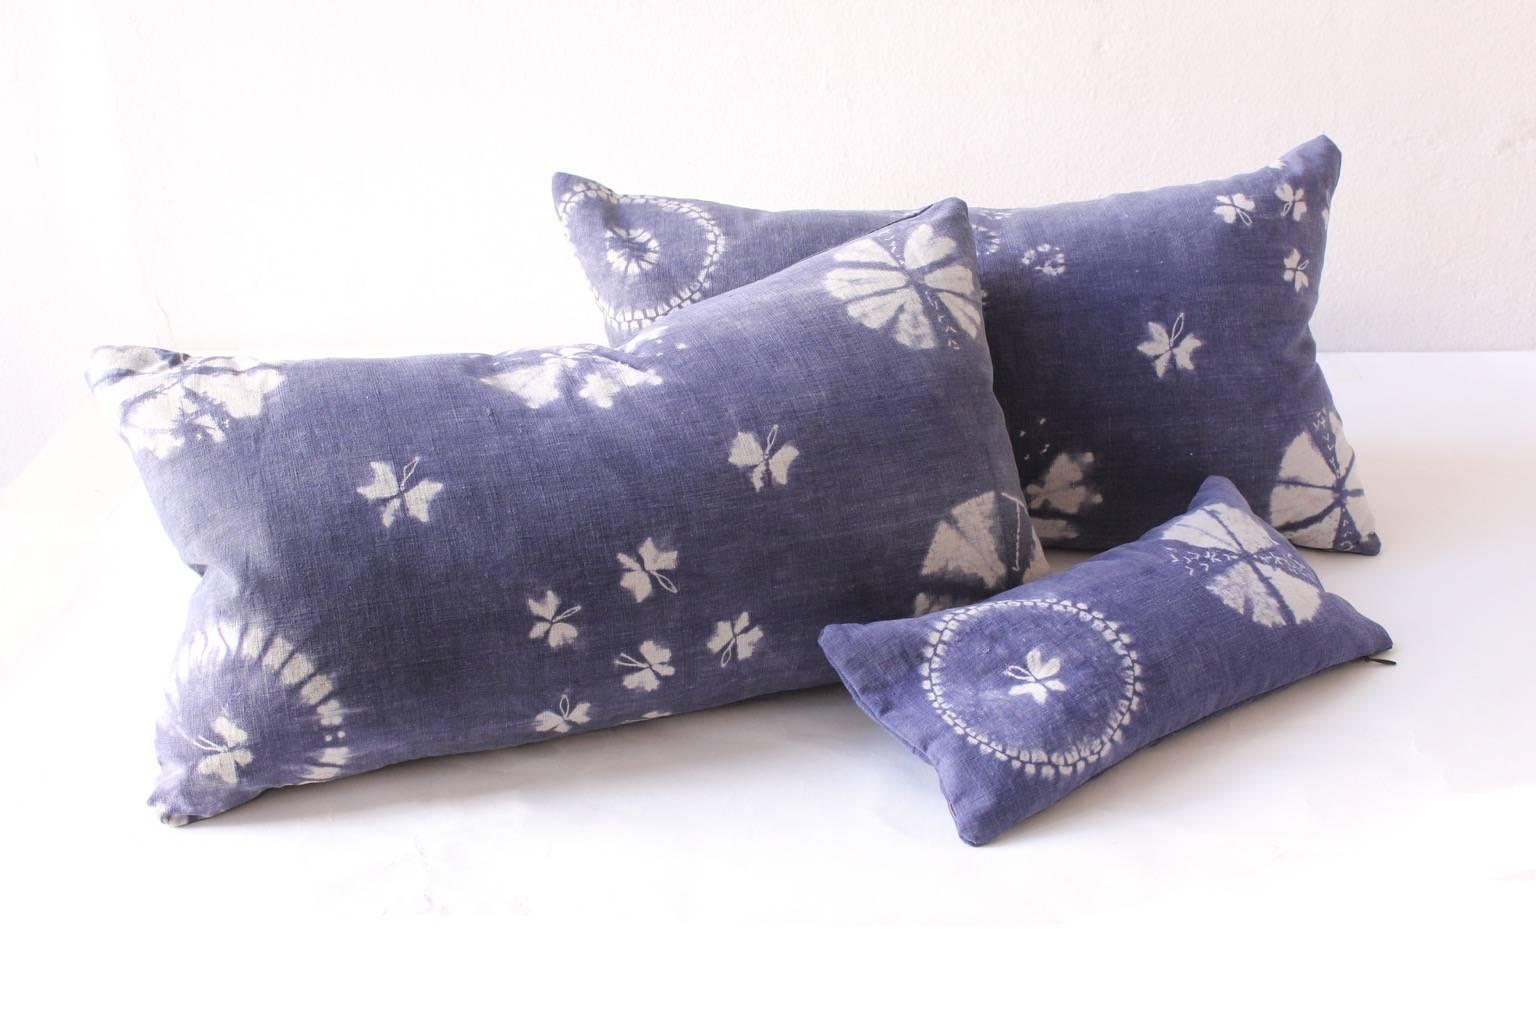 Chinese Antique Resist Dye Indigo Pillow, Small Lumbar Scented For Sale